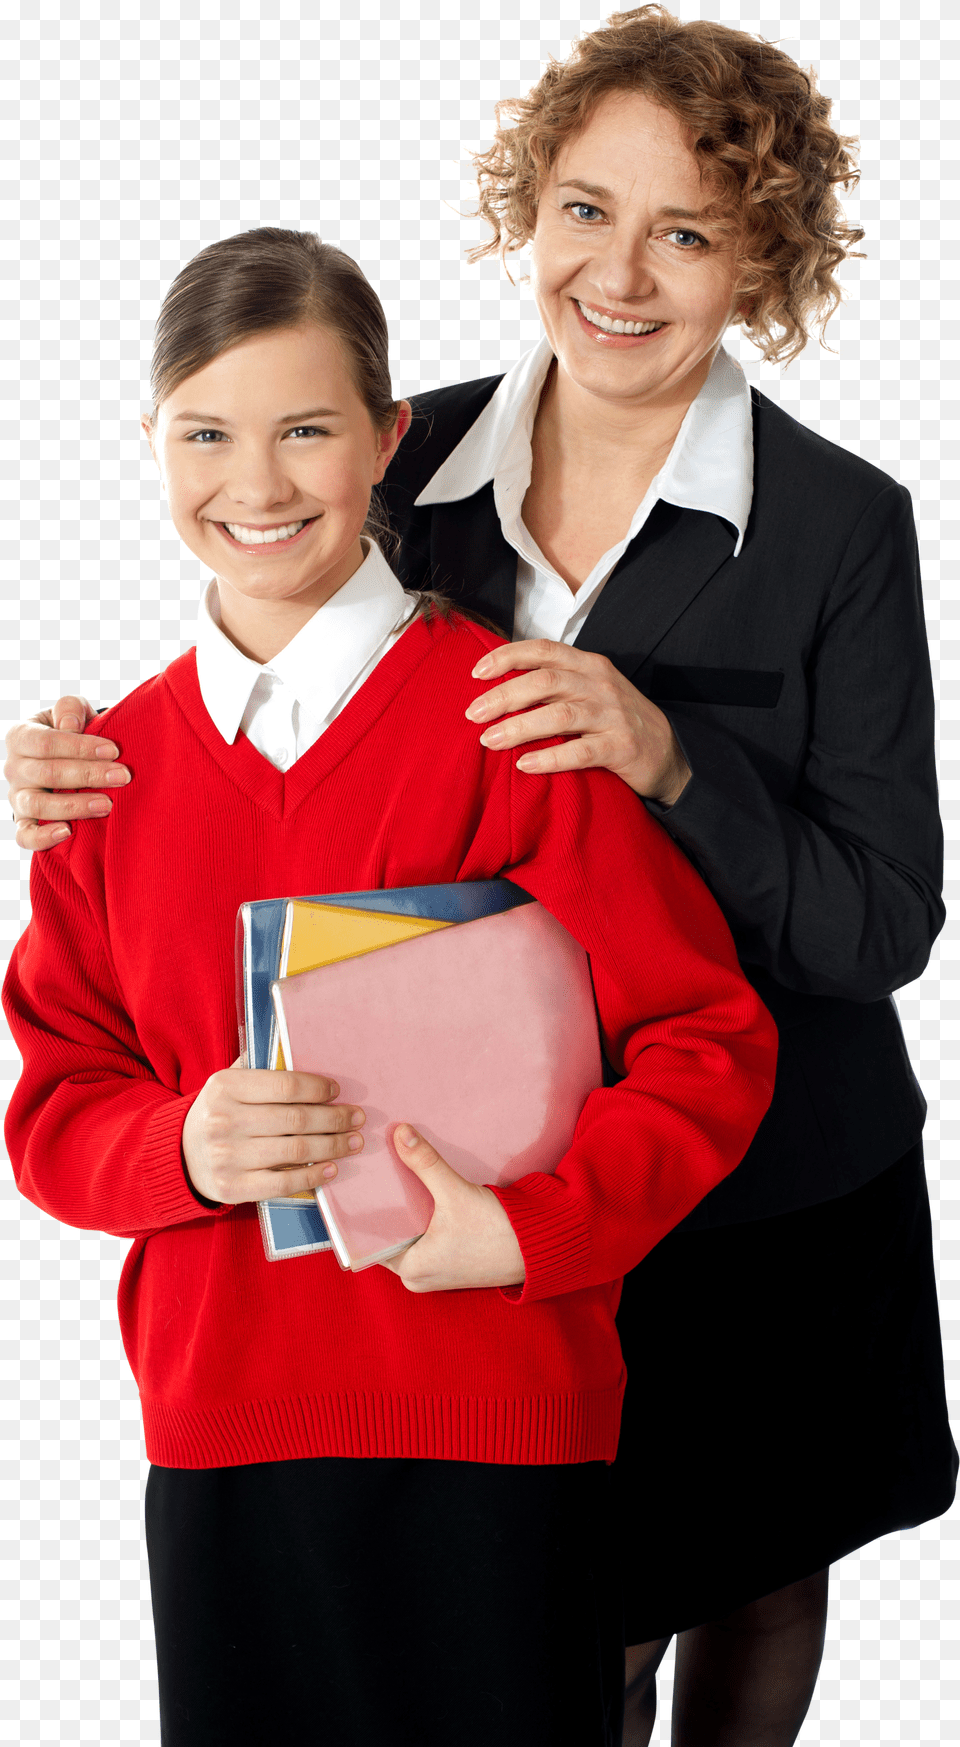 Teacher Image Free Png Download